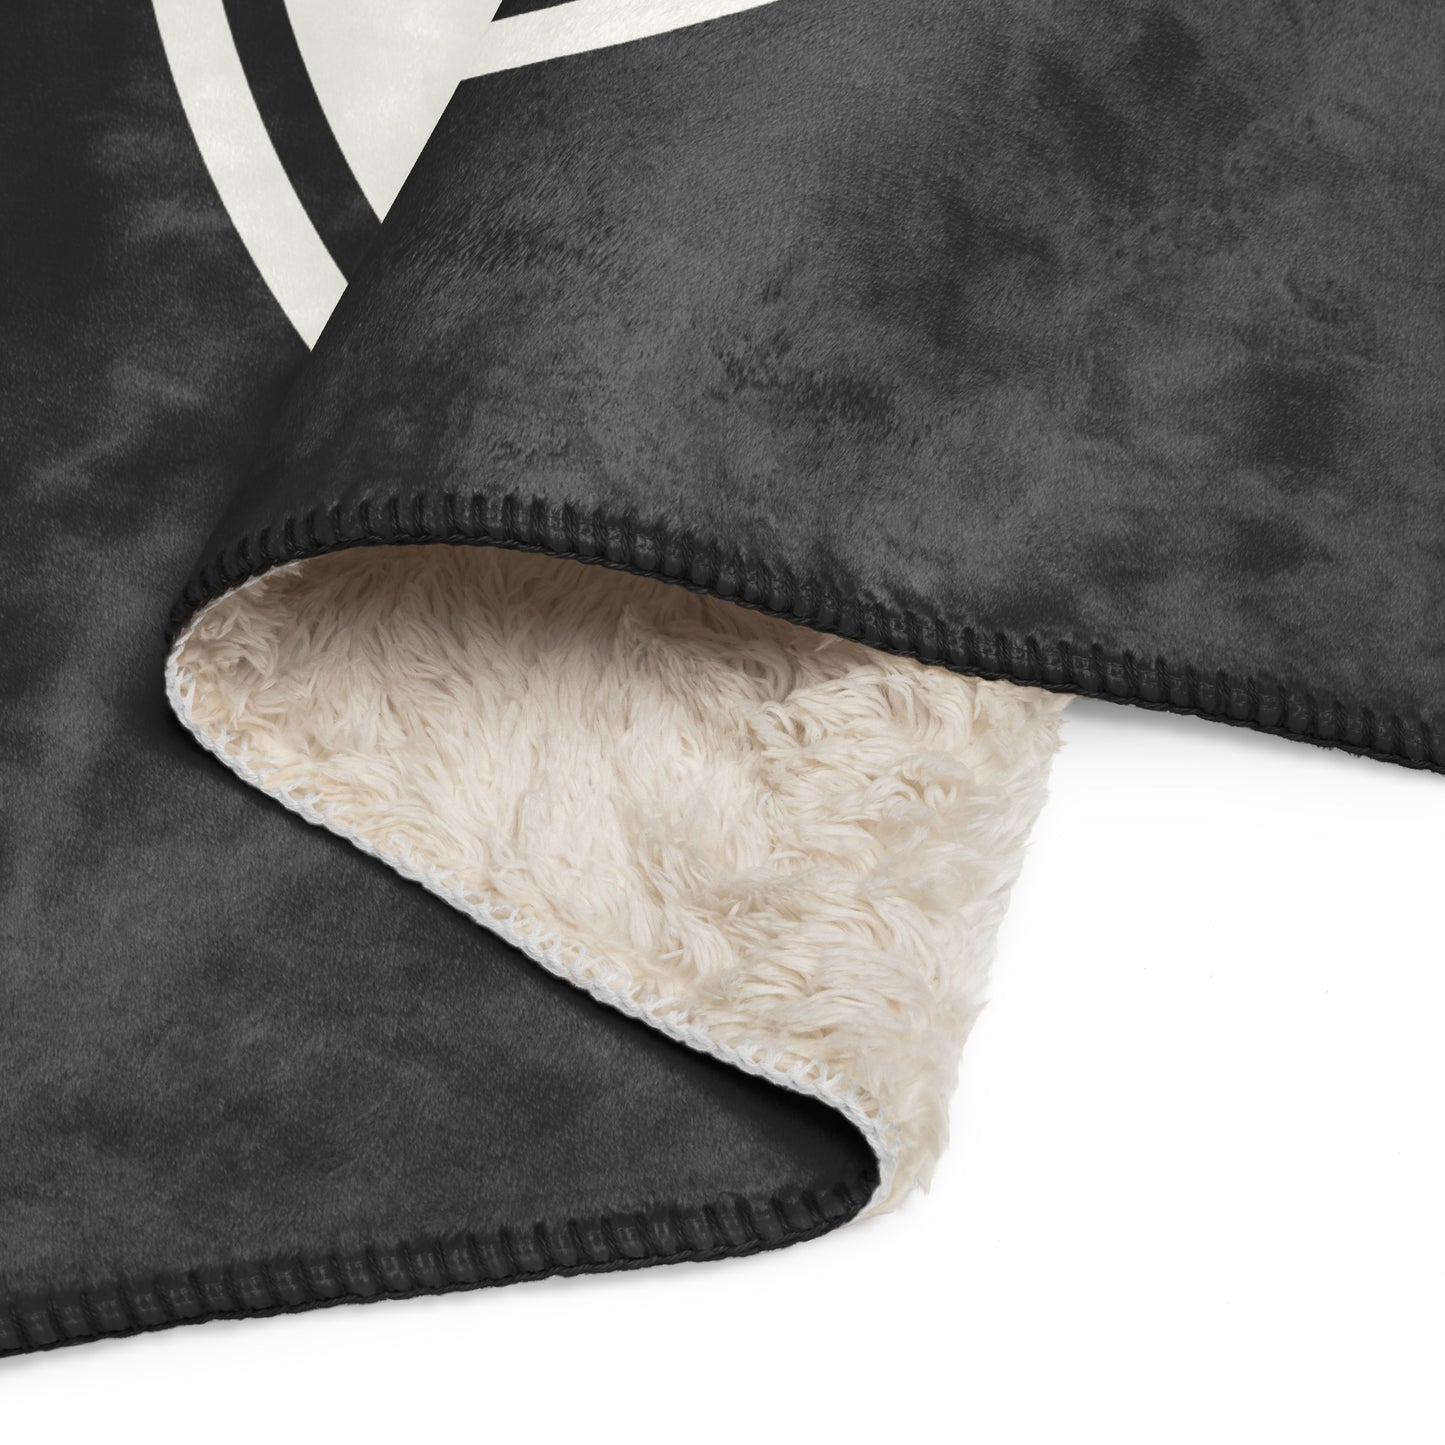 Unique Travel Gift Sherpa Blanket - White Oval • BUF Buffalo • YHM Designs - Image 08